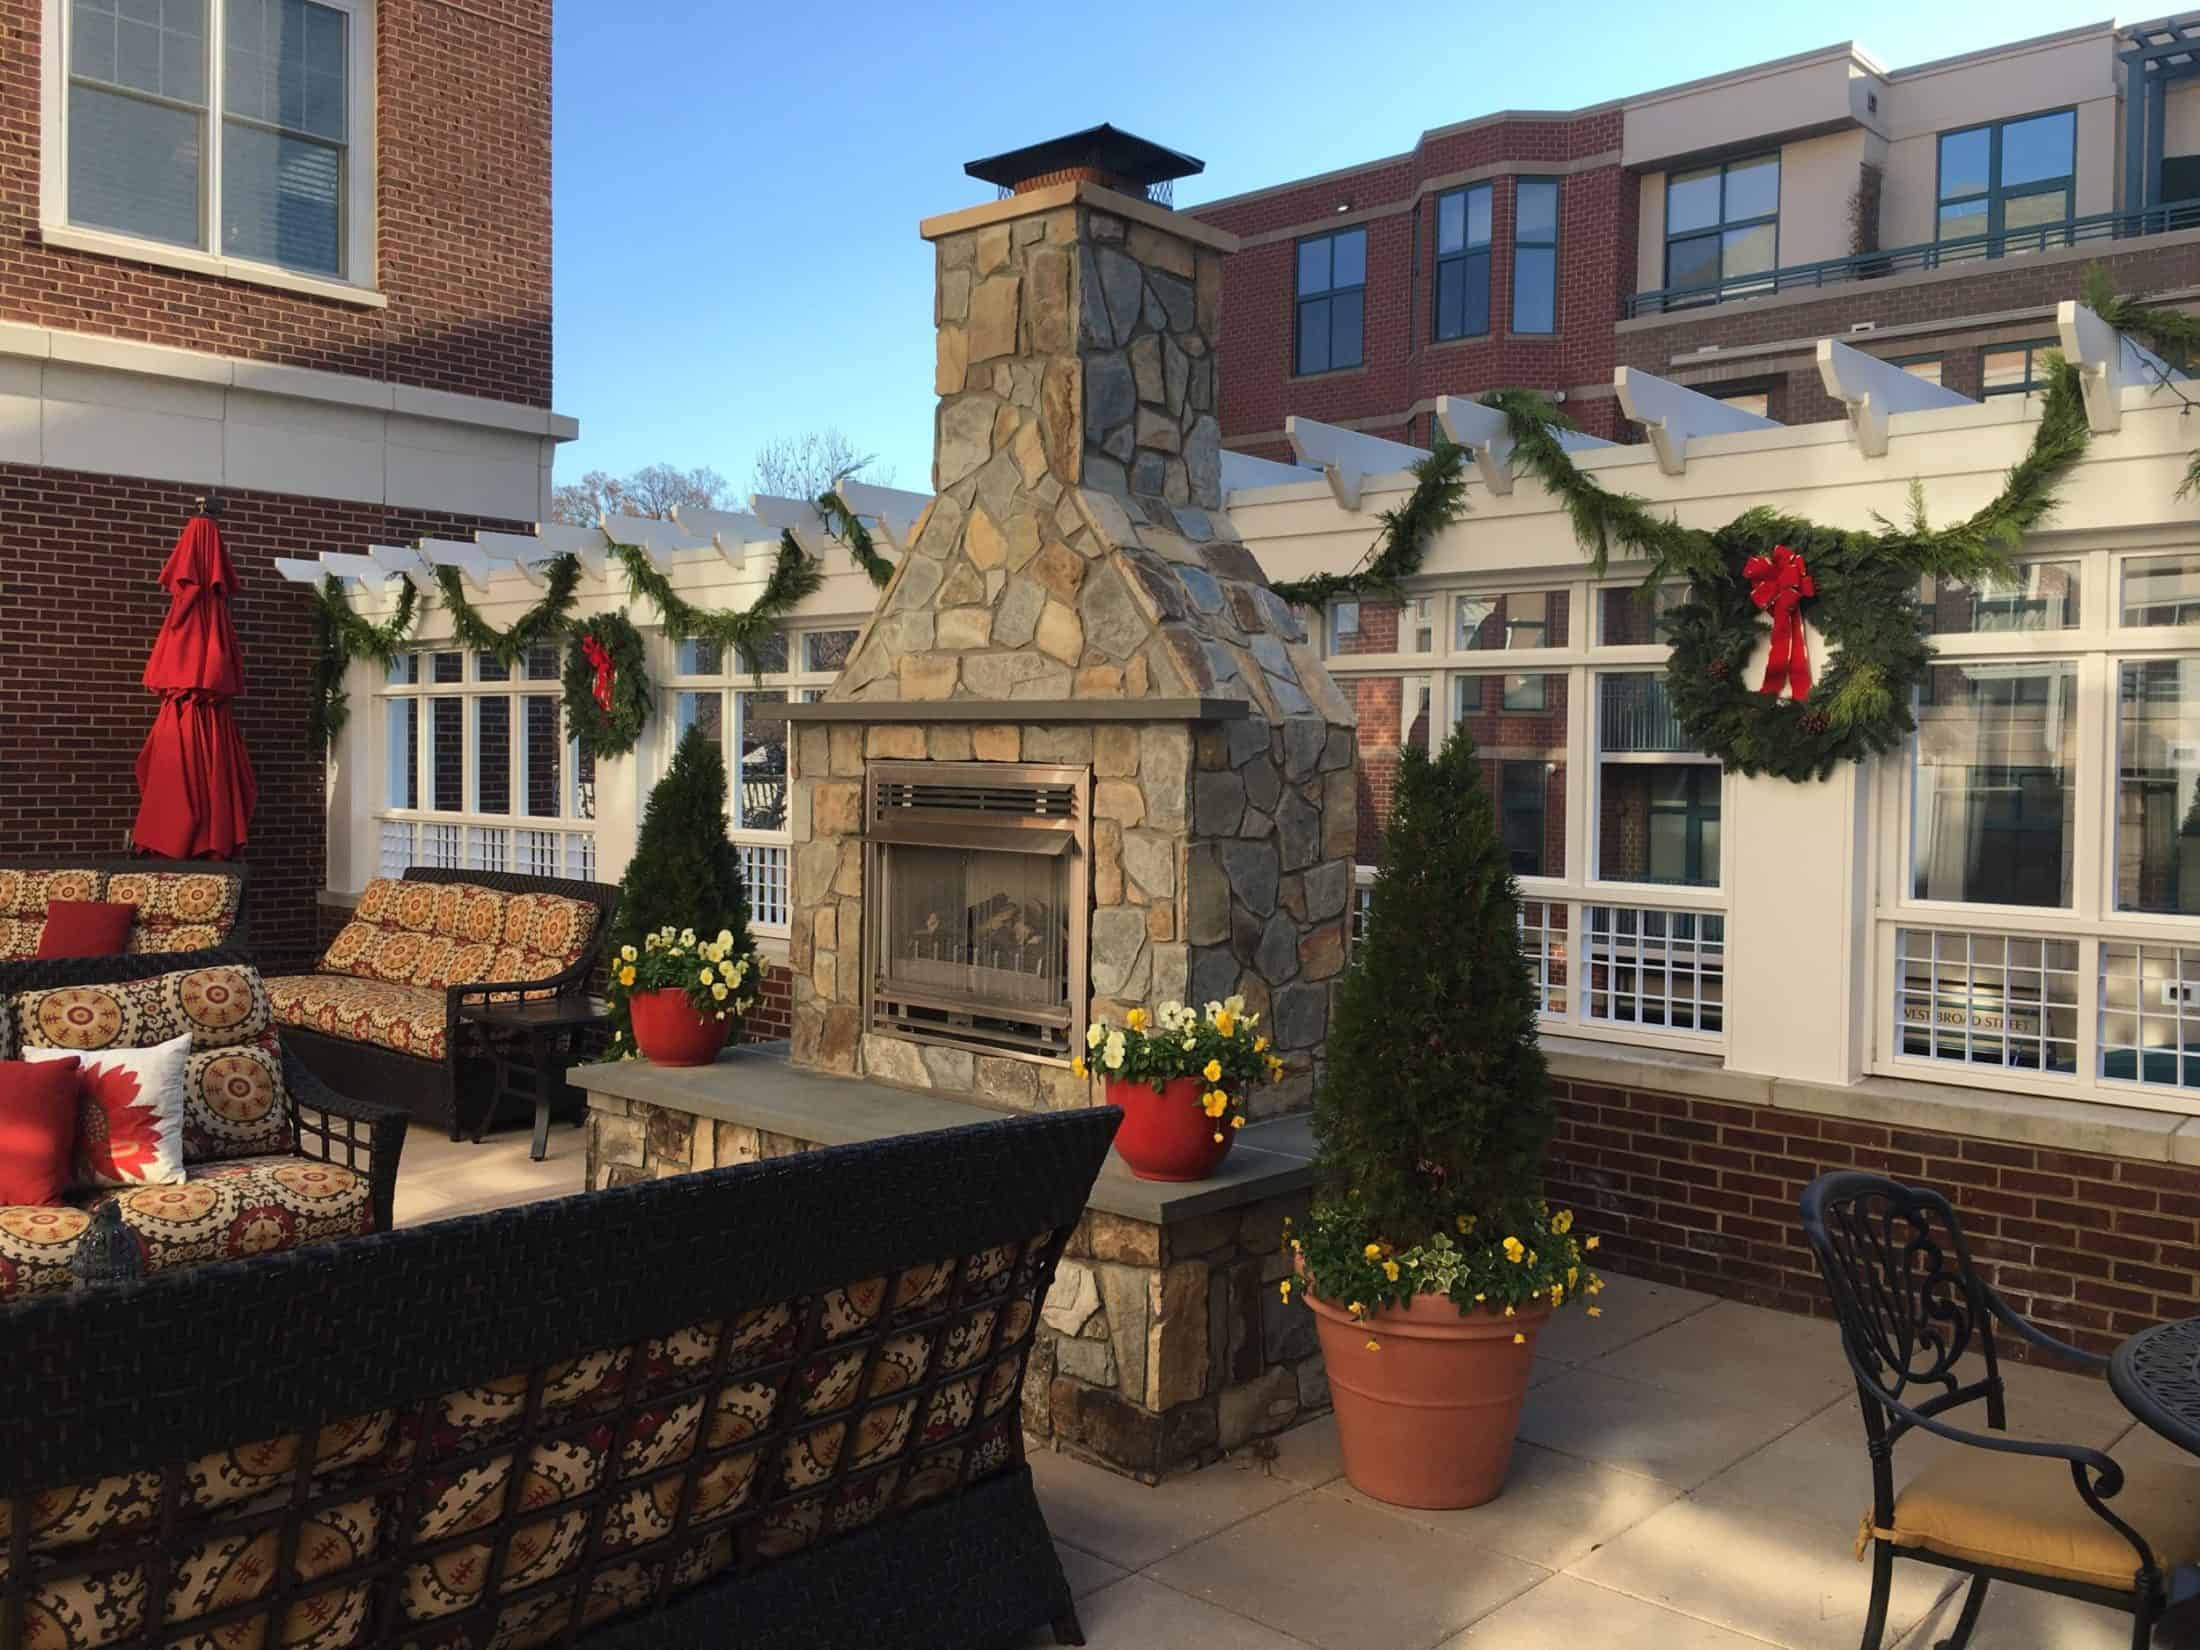 kensington patio with holiday decorations